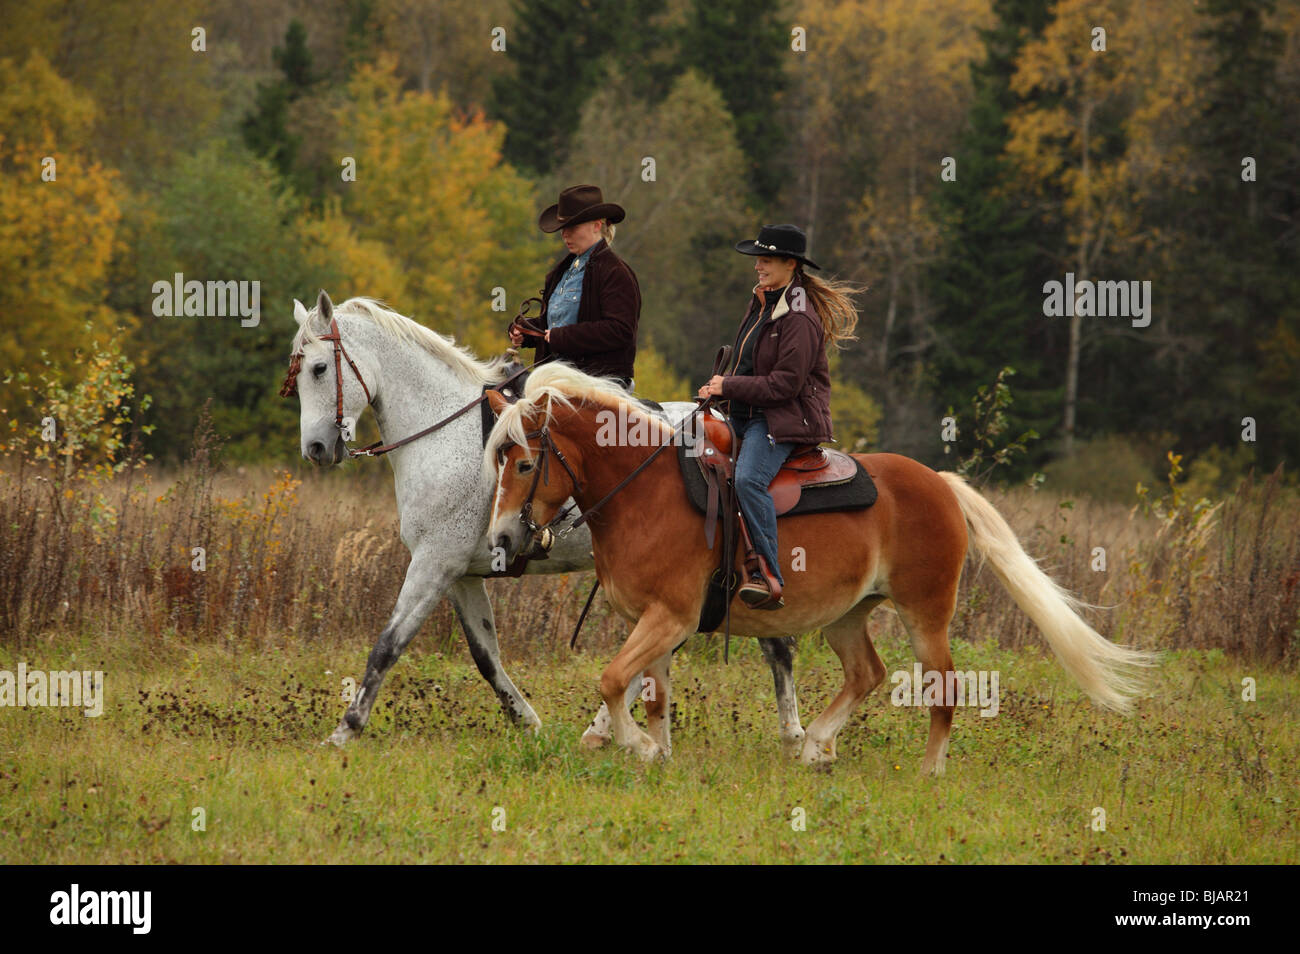 Two women dressed in cowboy clothes and hats riding horses western ...